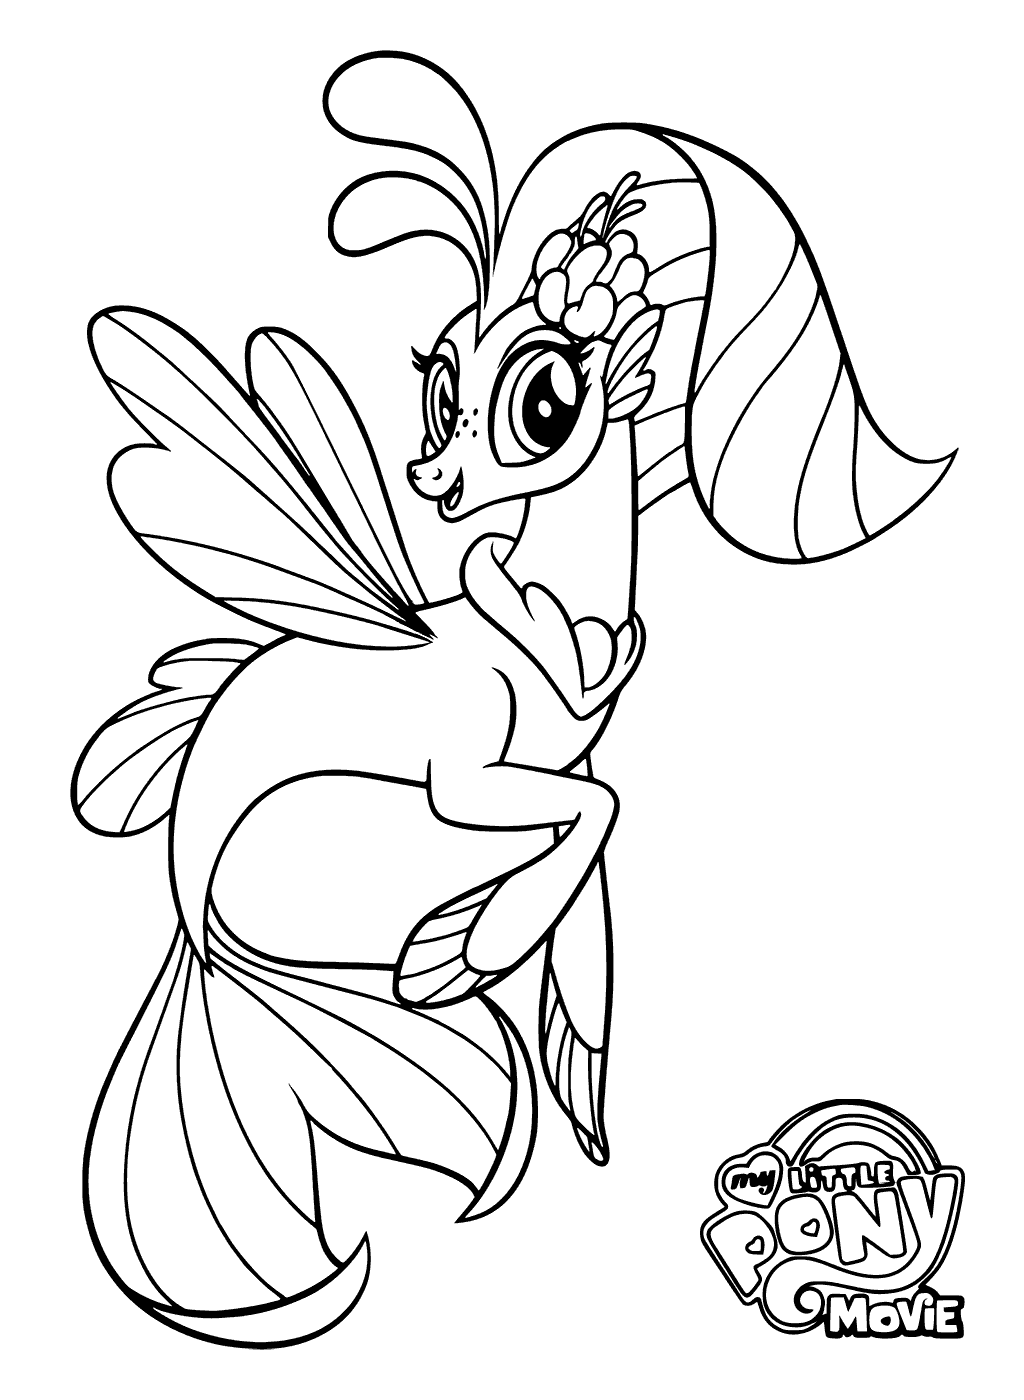 Free My Little Pony The Movie coloring pages to print for kids Download print and color